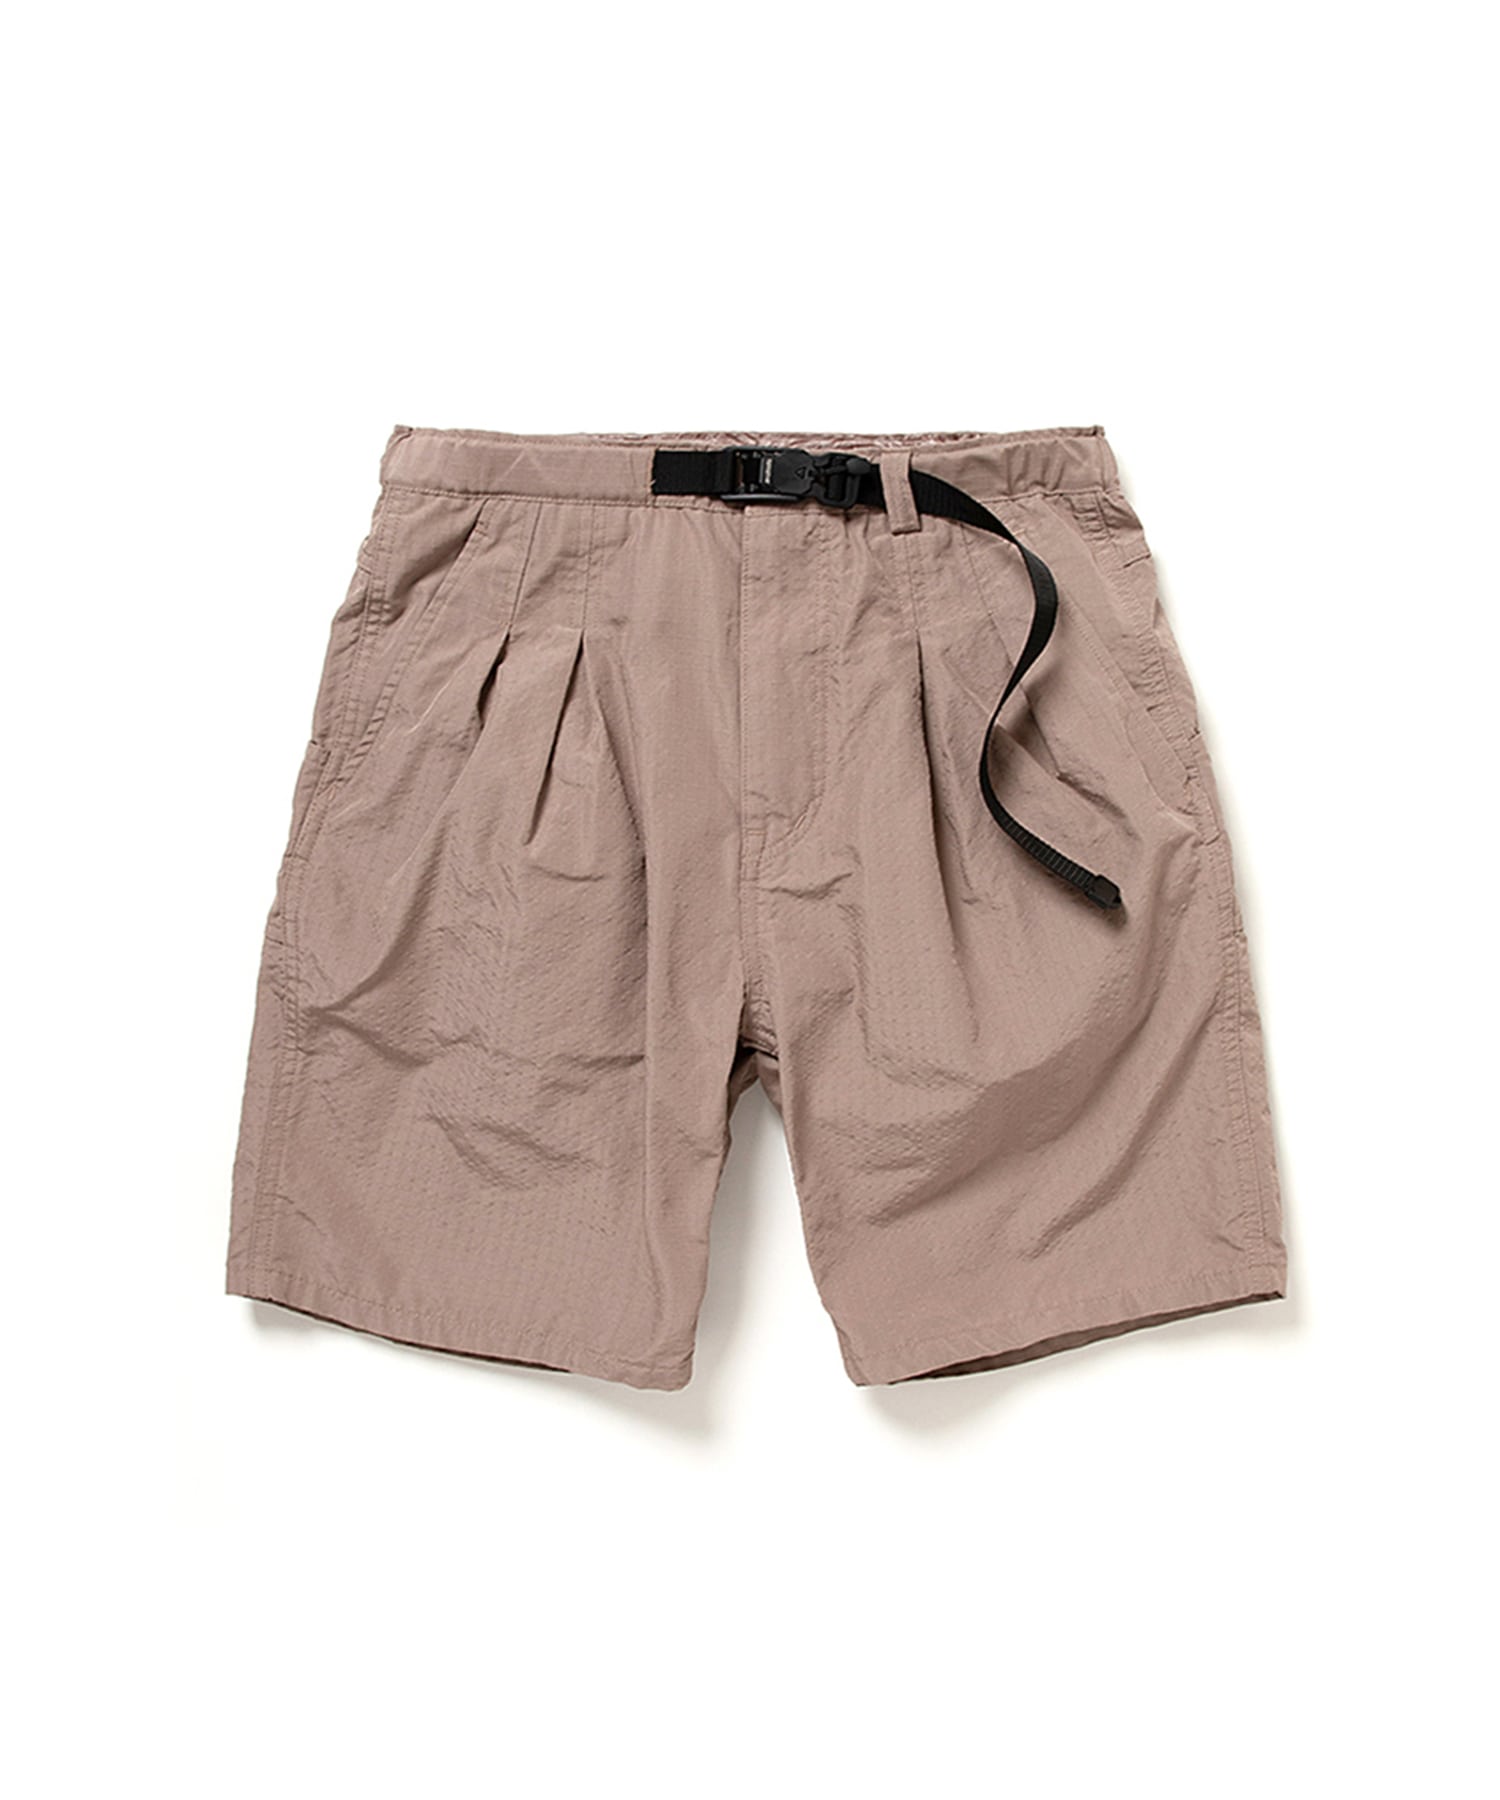 ALPINIST EASY SHORTS POLY RIPSTOP SHAPE MEMORY WITH FIDLOCK?